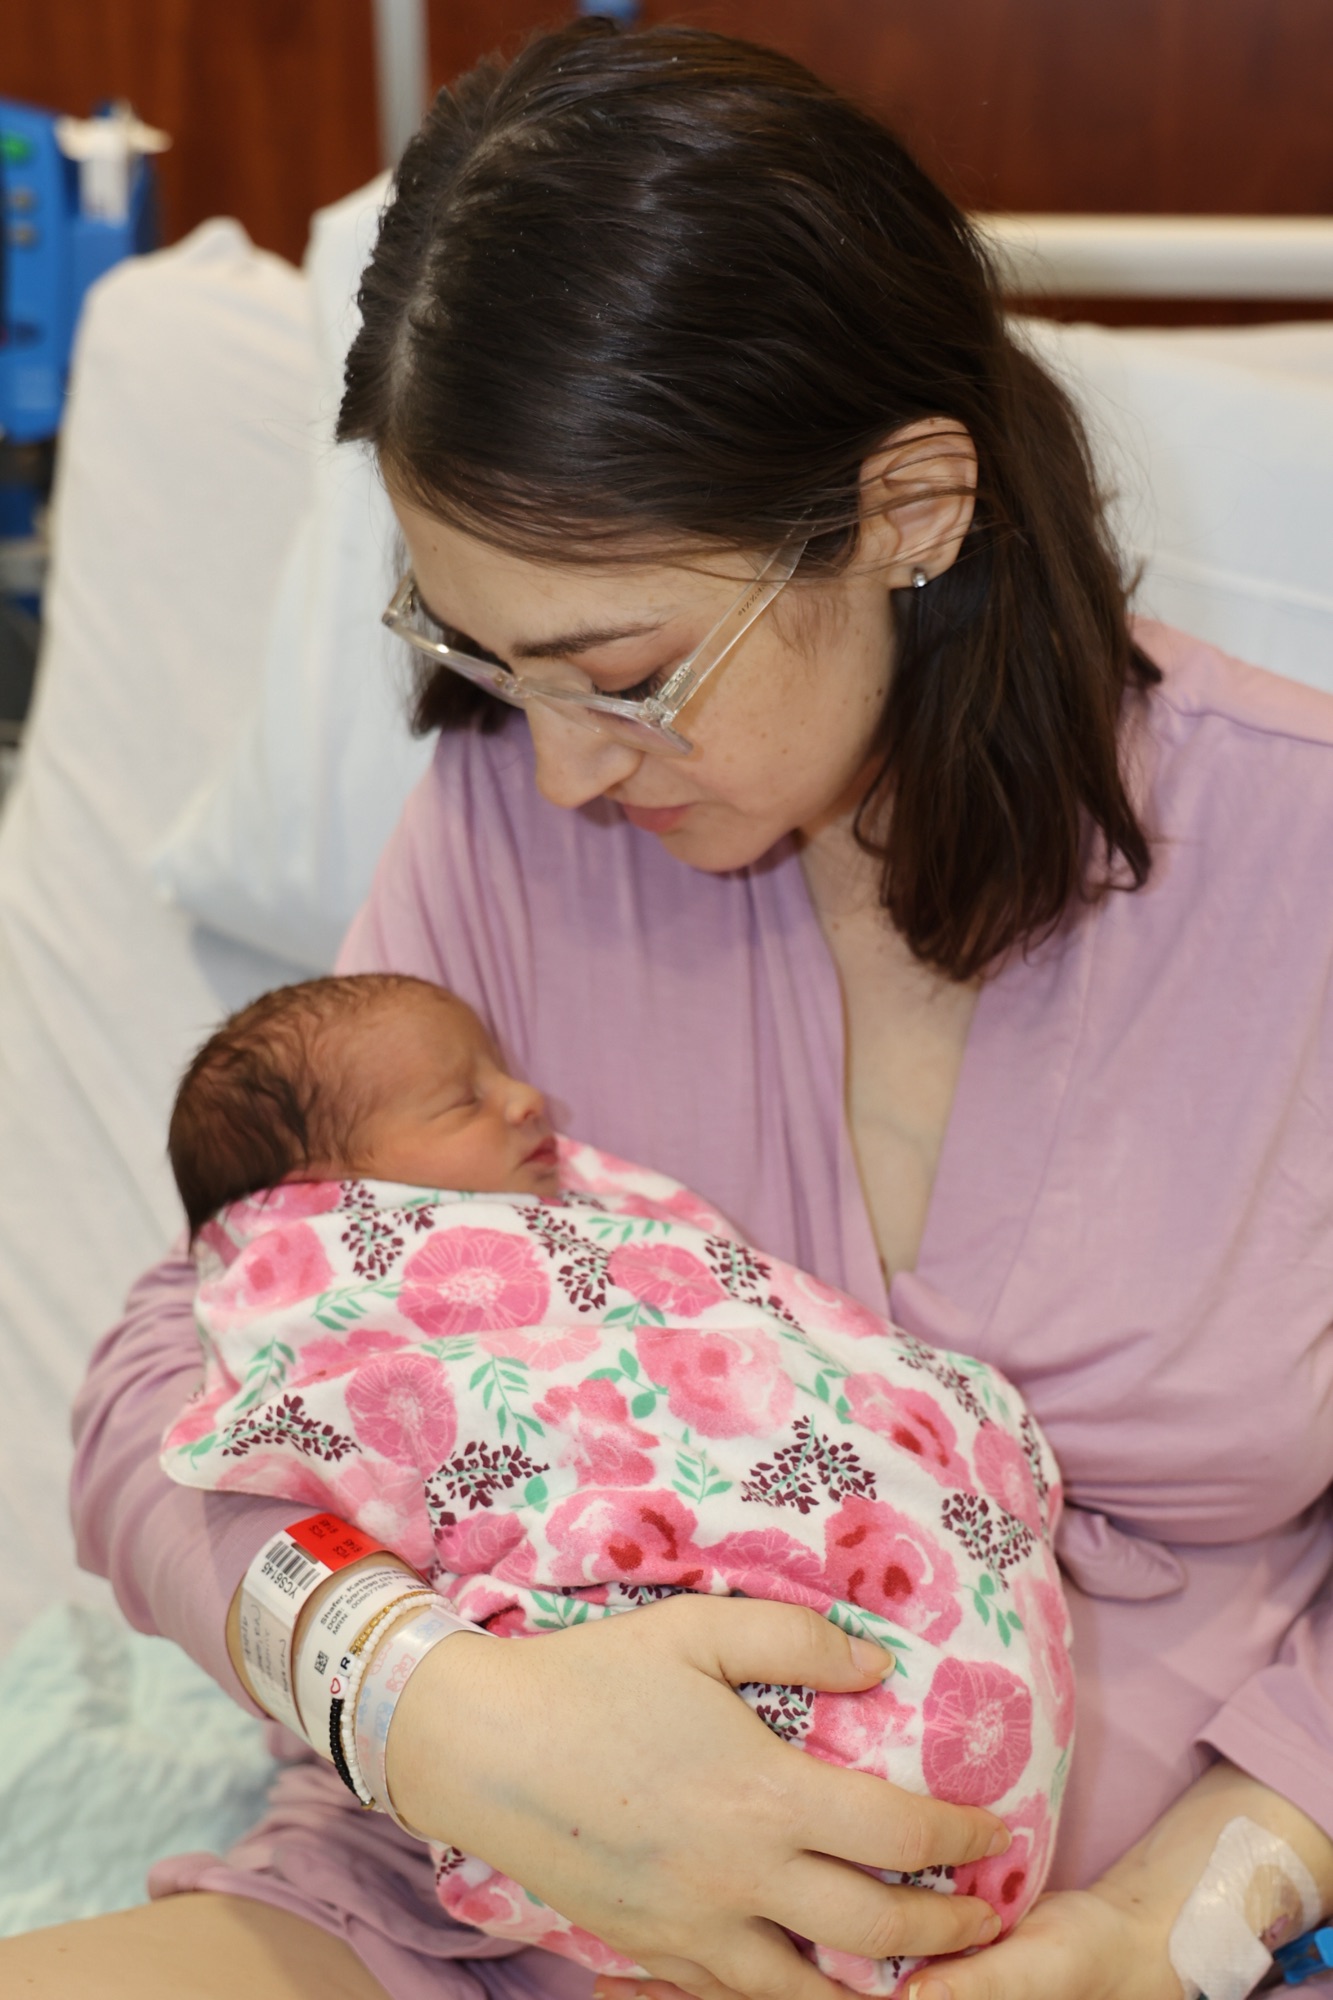 Author sits in hospital bed, wearing a purple robe, holding newborn baby who is wrapped in a pink floral blanket 